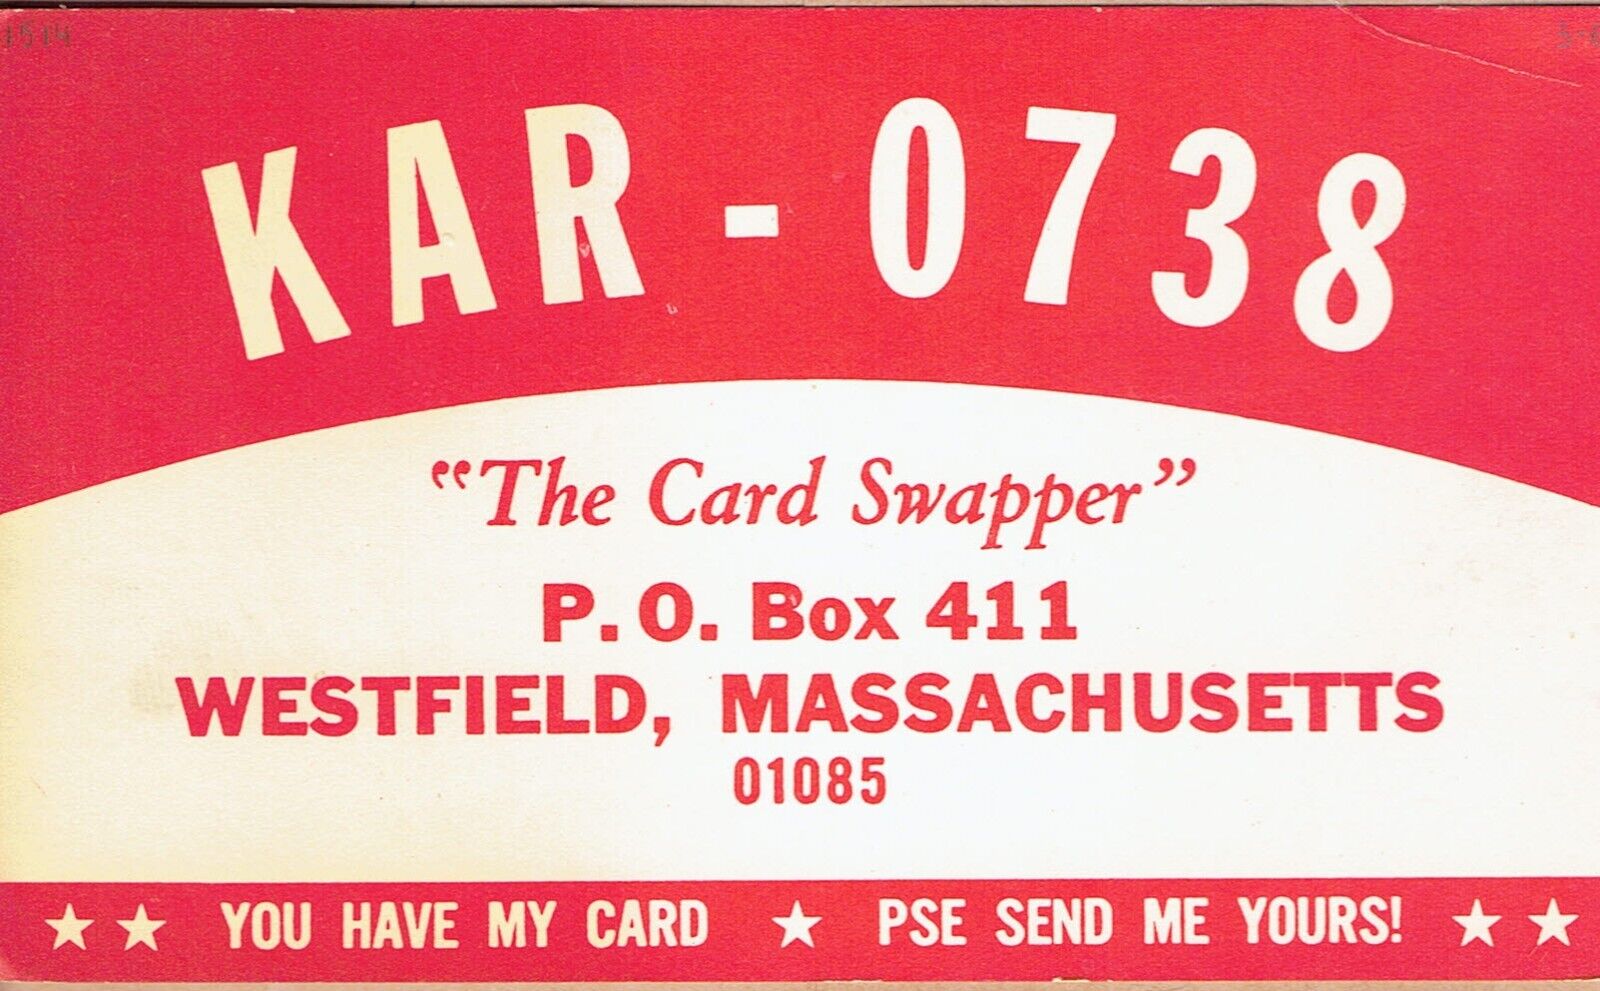 Old QSL-card from The Card Swapper, Westfield, MA, KAR-0738, Jan 1969